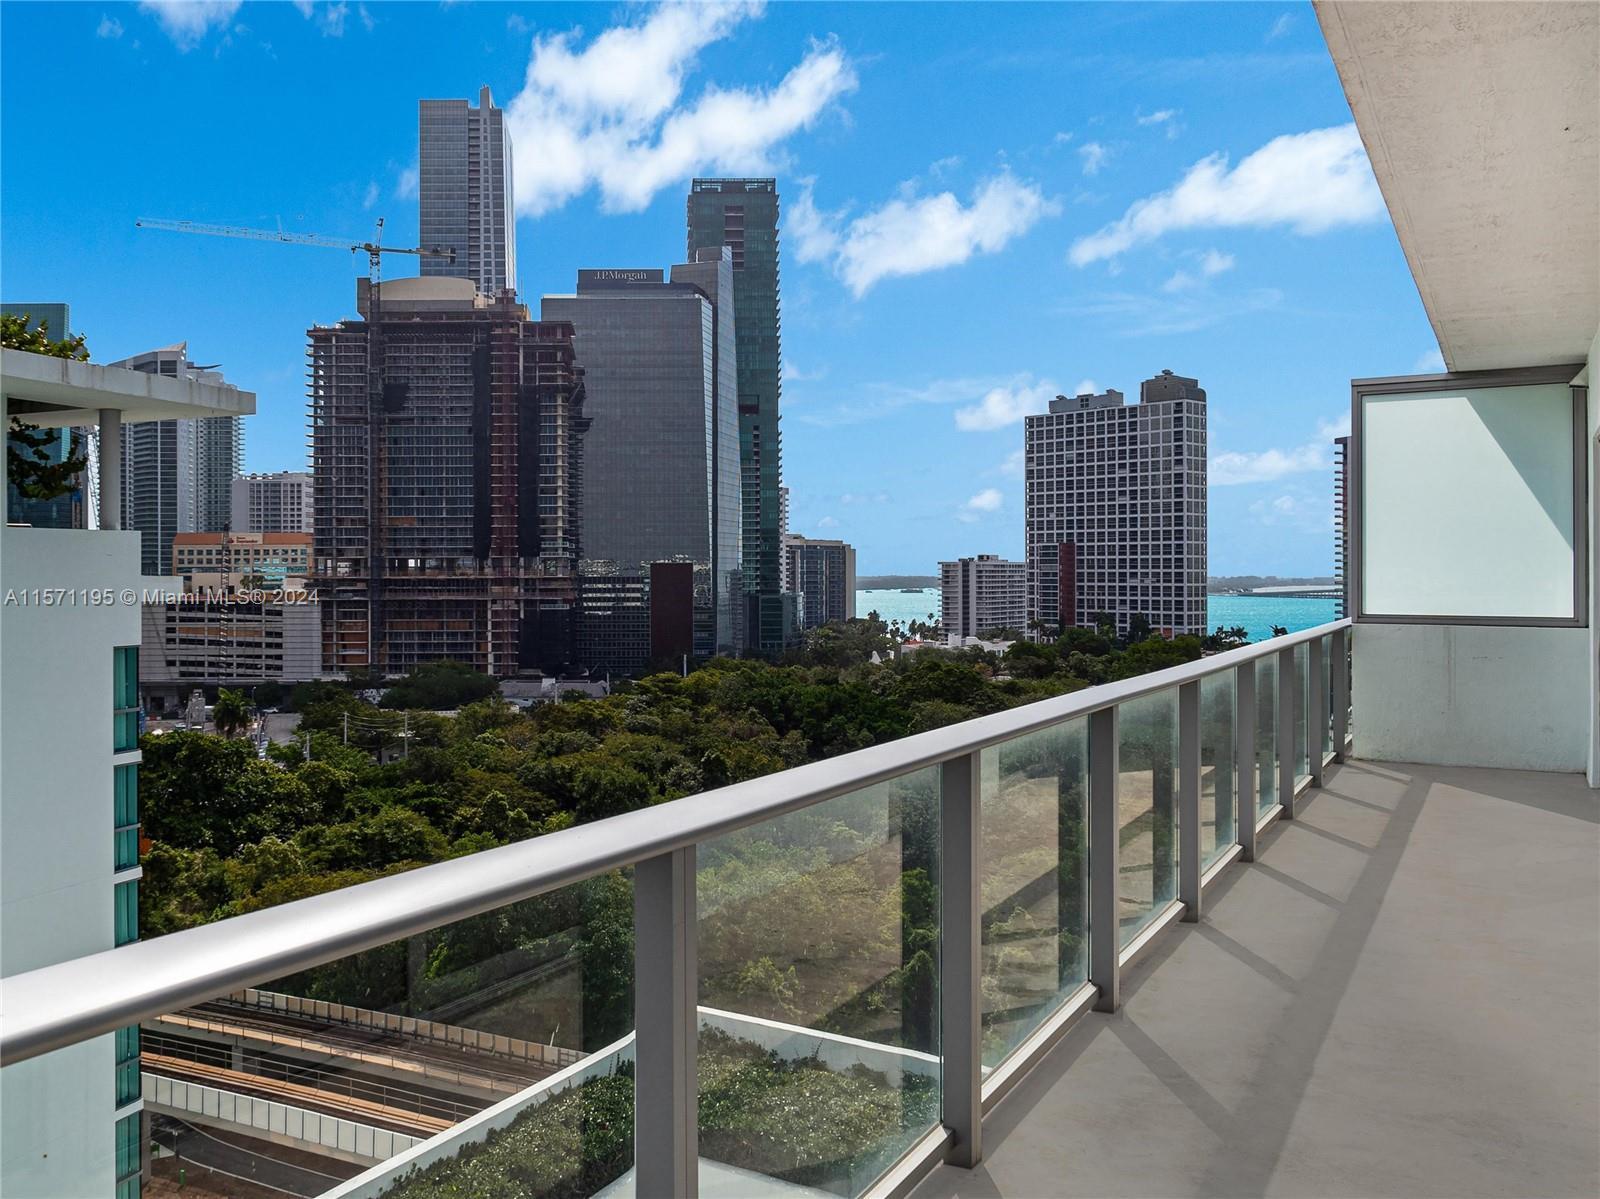 Luxury boutique Condominium located in the heart of Brickell, designed by renowned architect Luis Re